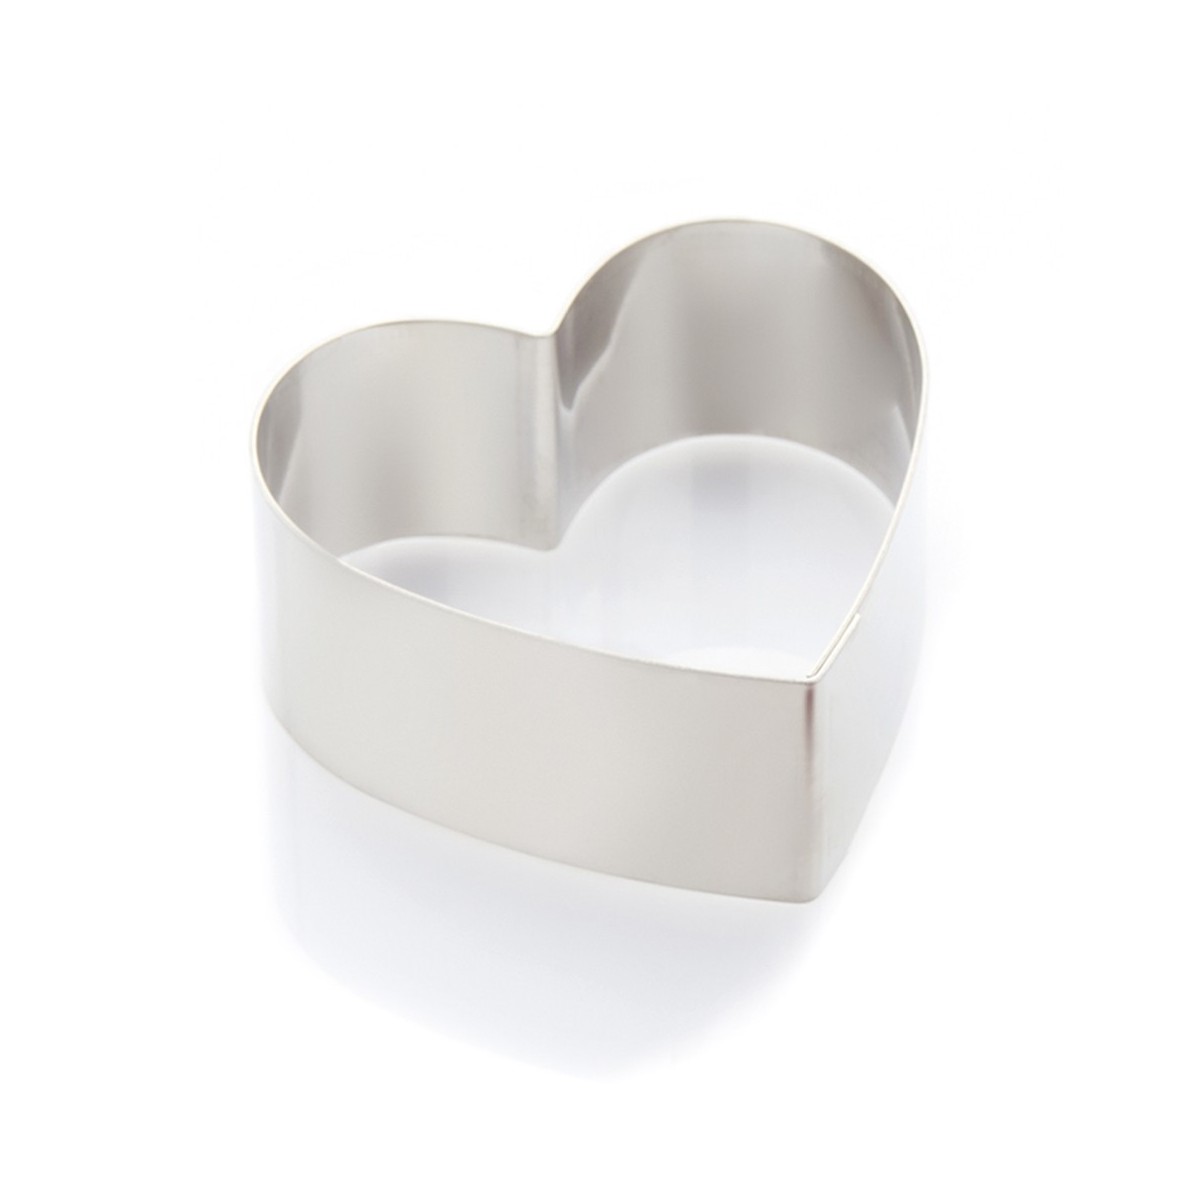 HEART WITHOUT CURVED BOTTOM IN STAINLESS STEEL 20 